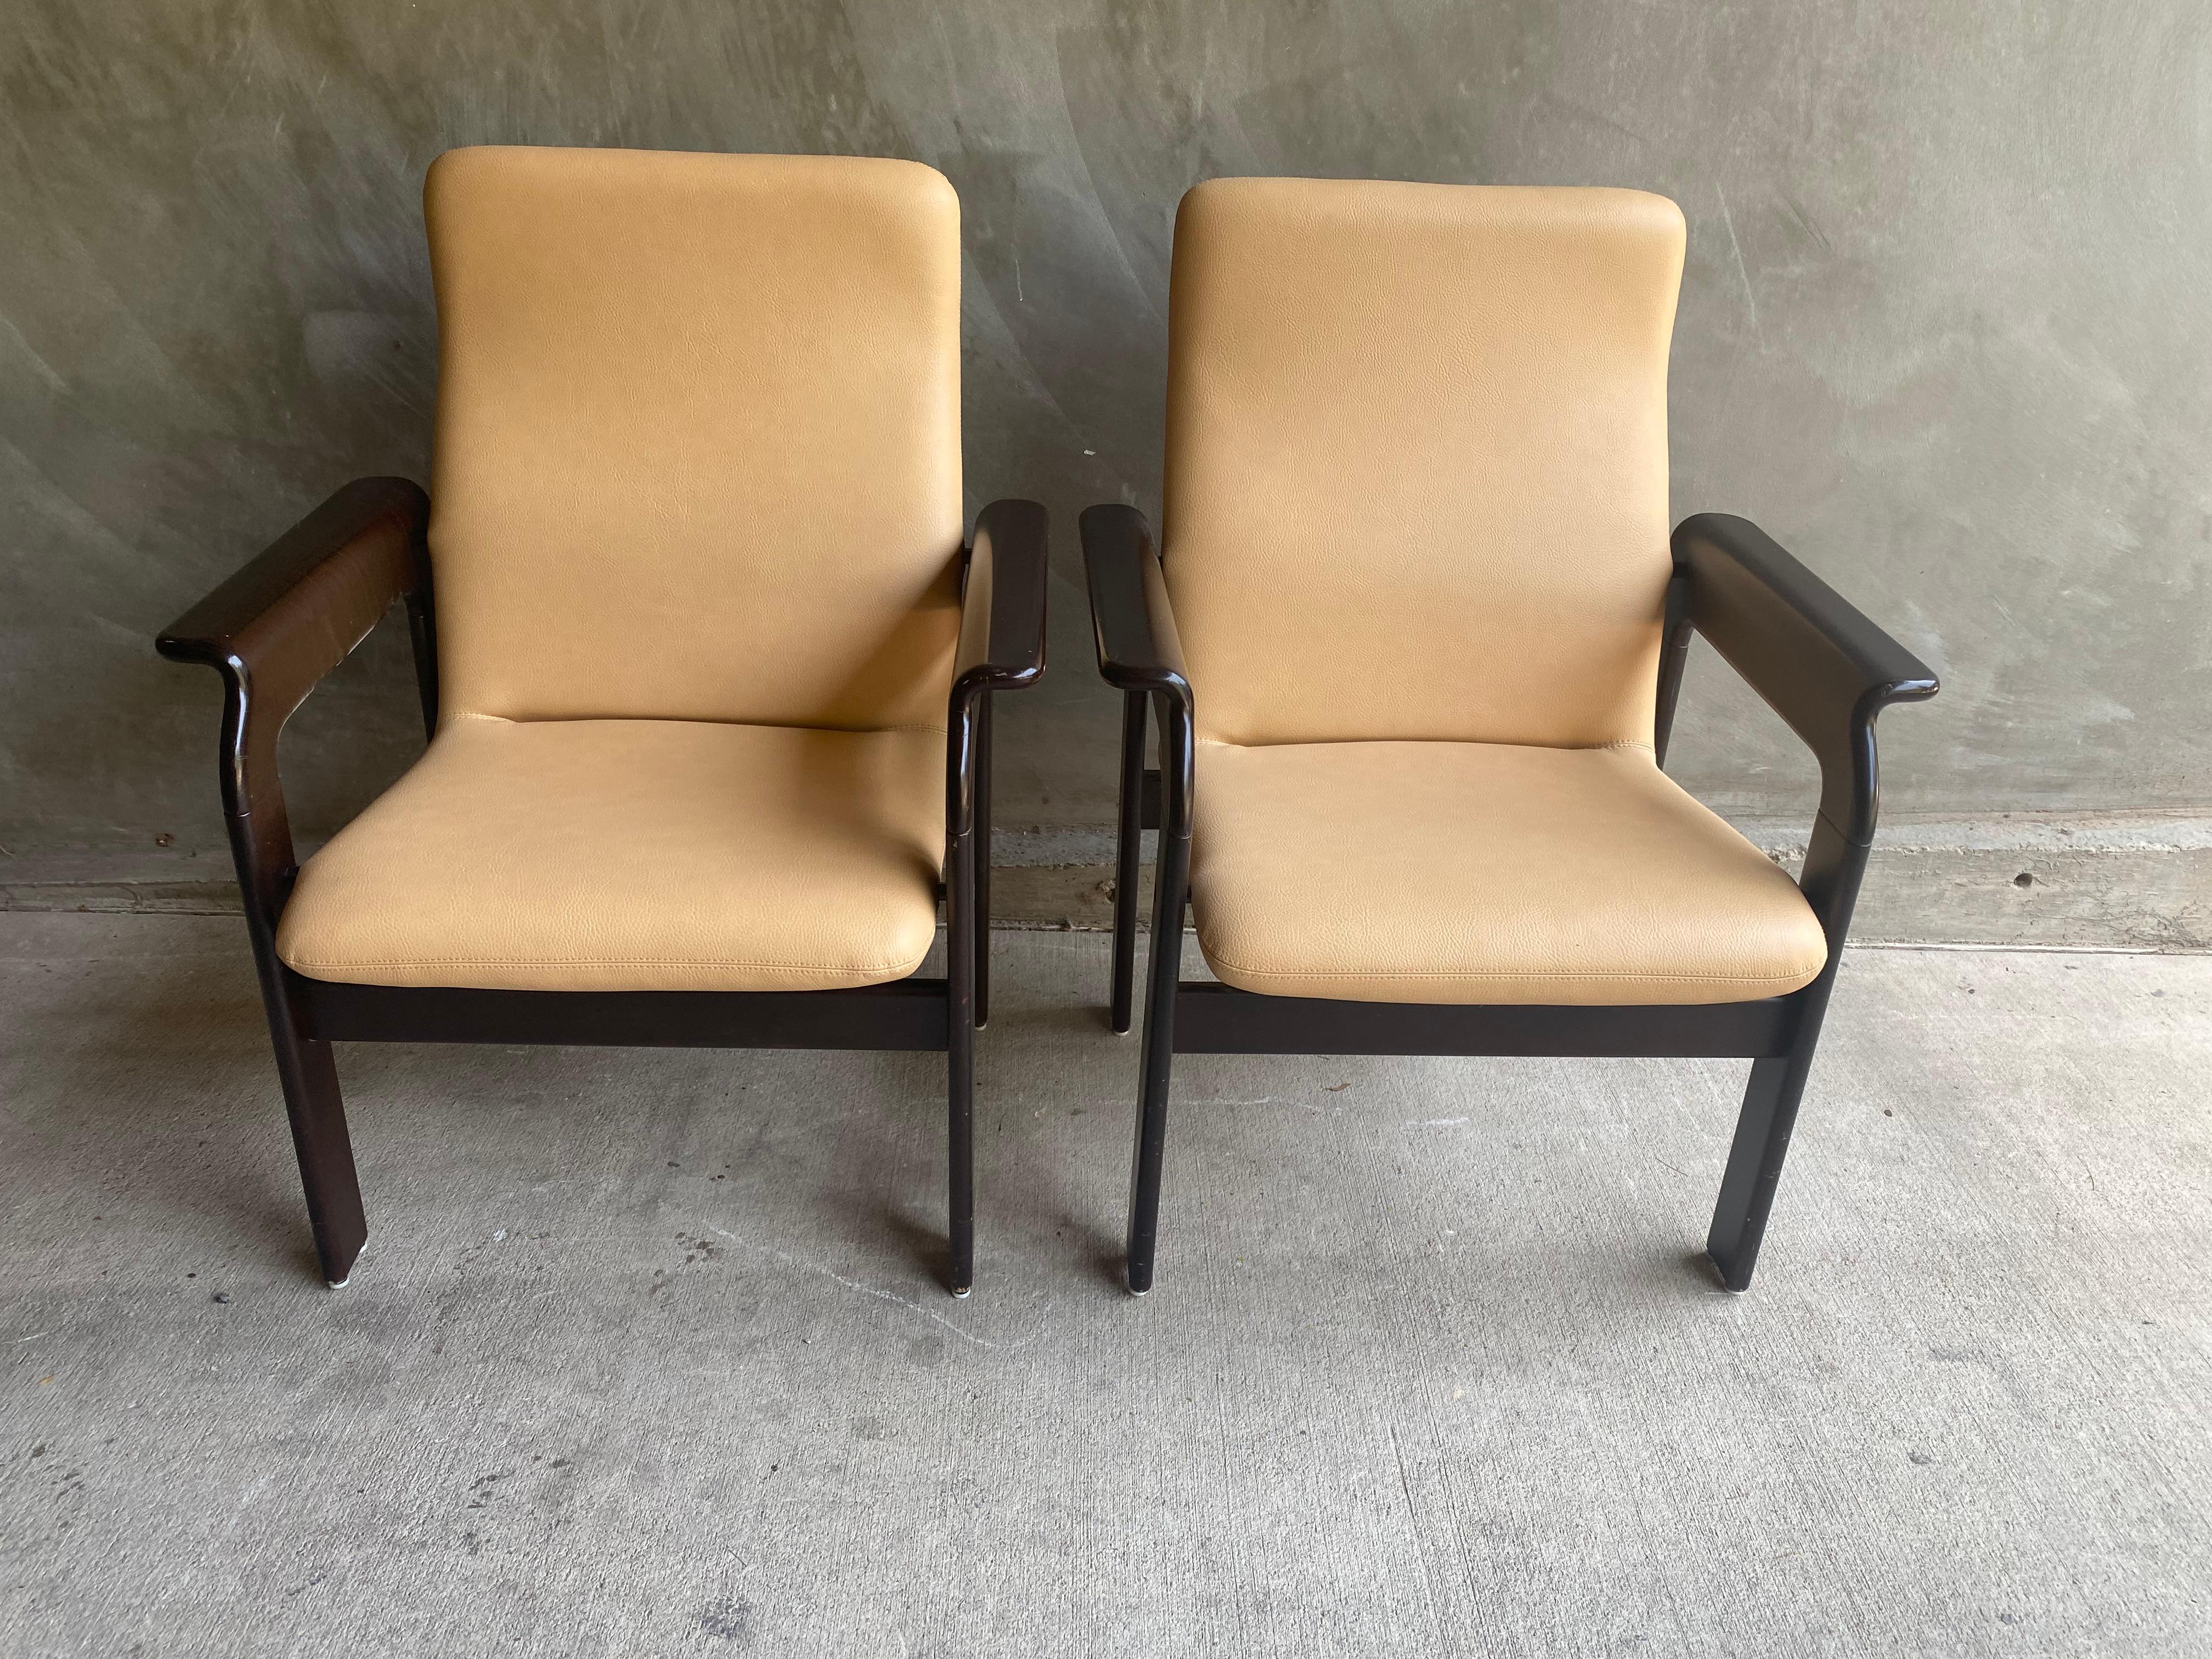 Pair of Scandinavian modern styled armed lounge chairs by Bruno Rey for Dietiker.  Designed in mid-1960's with continued manufacturing. Comfortable with generous proportions.  Due to more recent production, the leather is in beautiful condition.